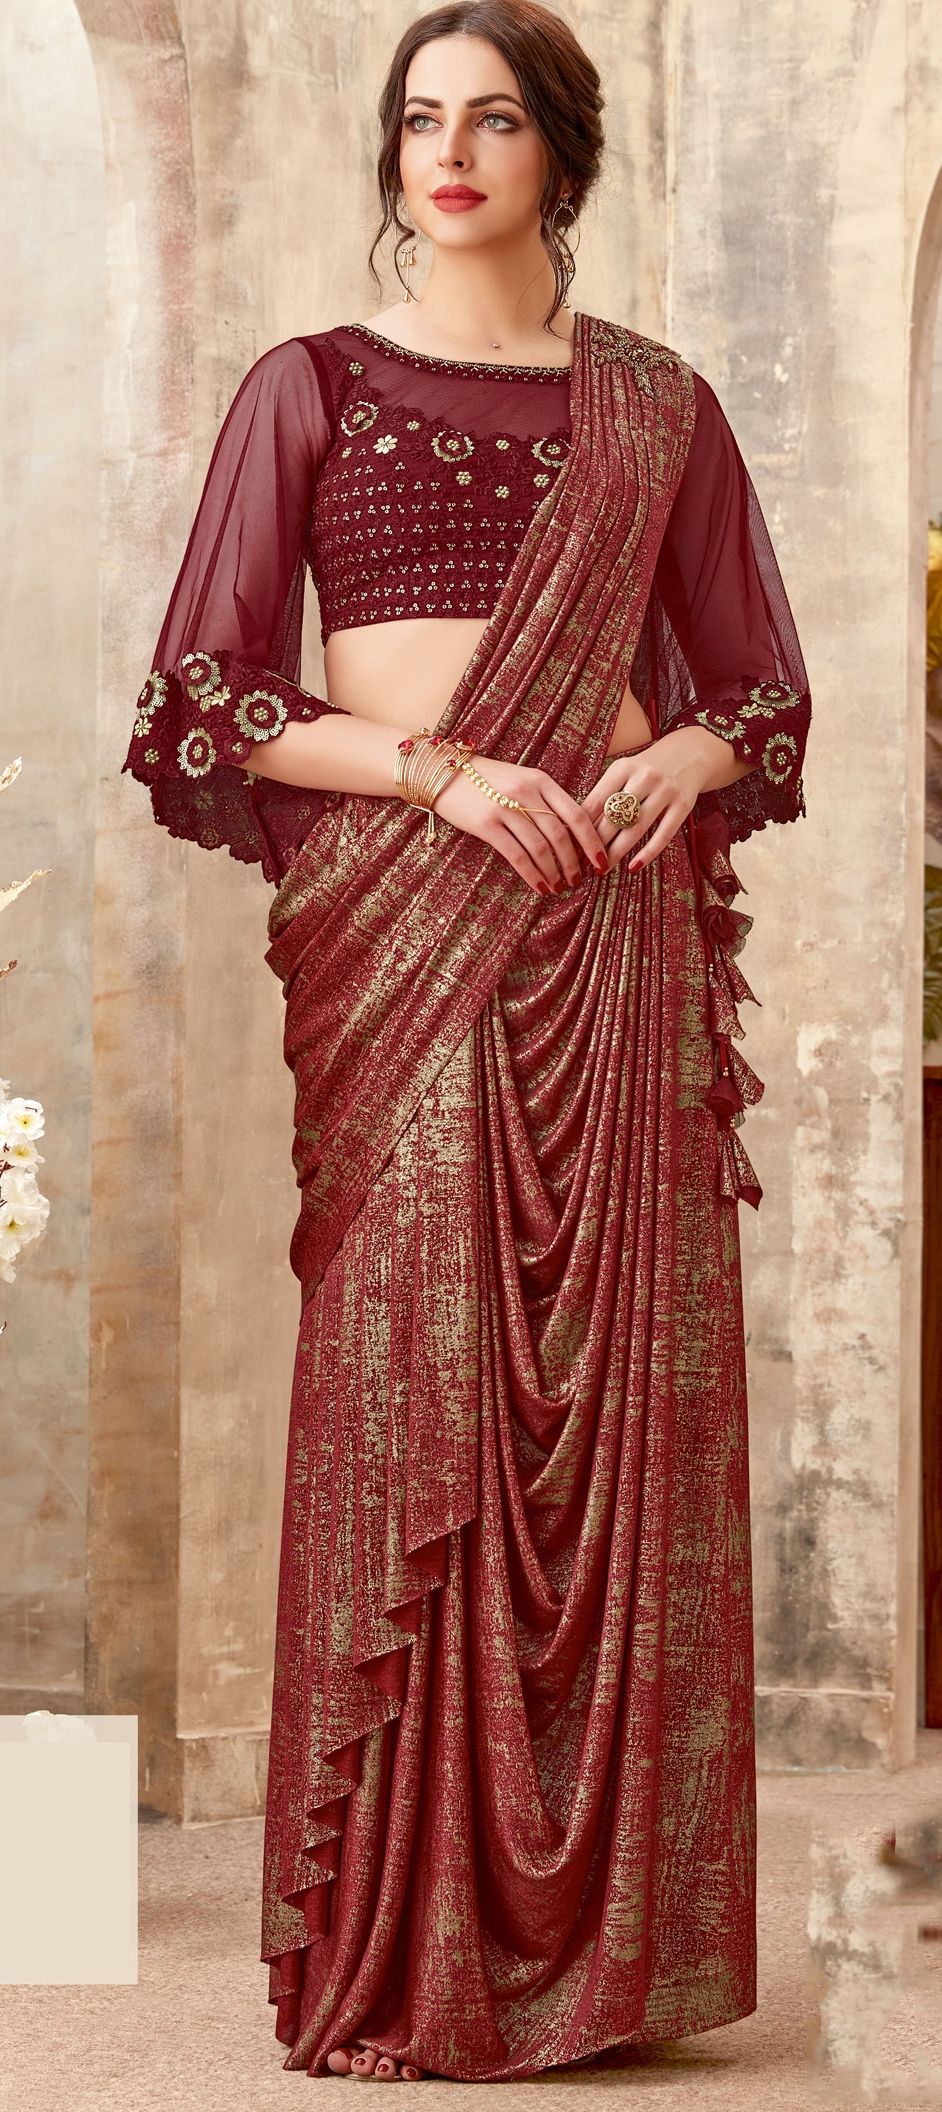 8 Chic Pre-stitched Saree Images for the Bride & Her Squad